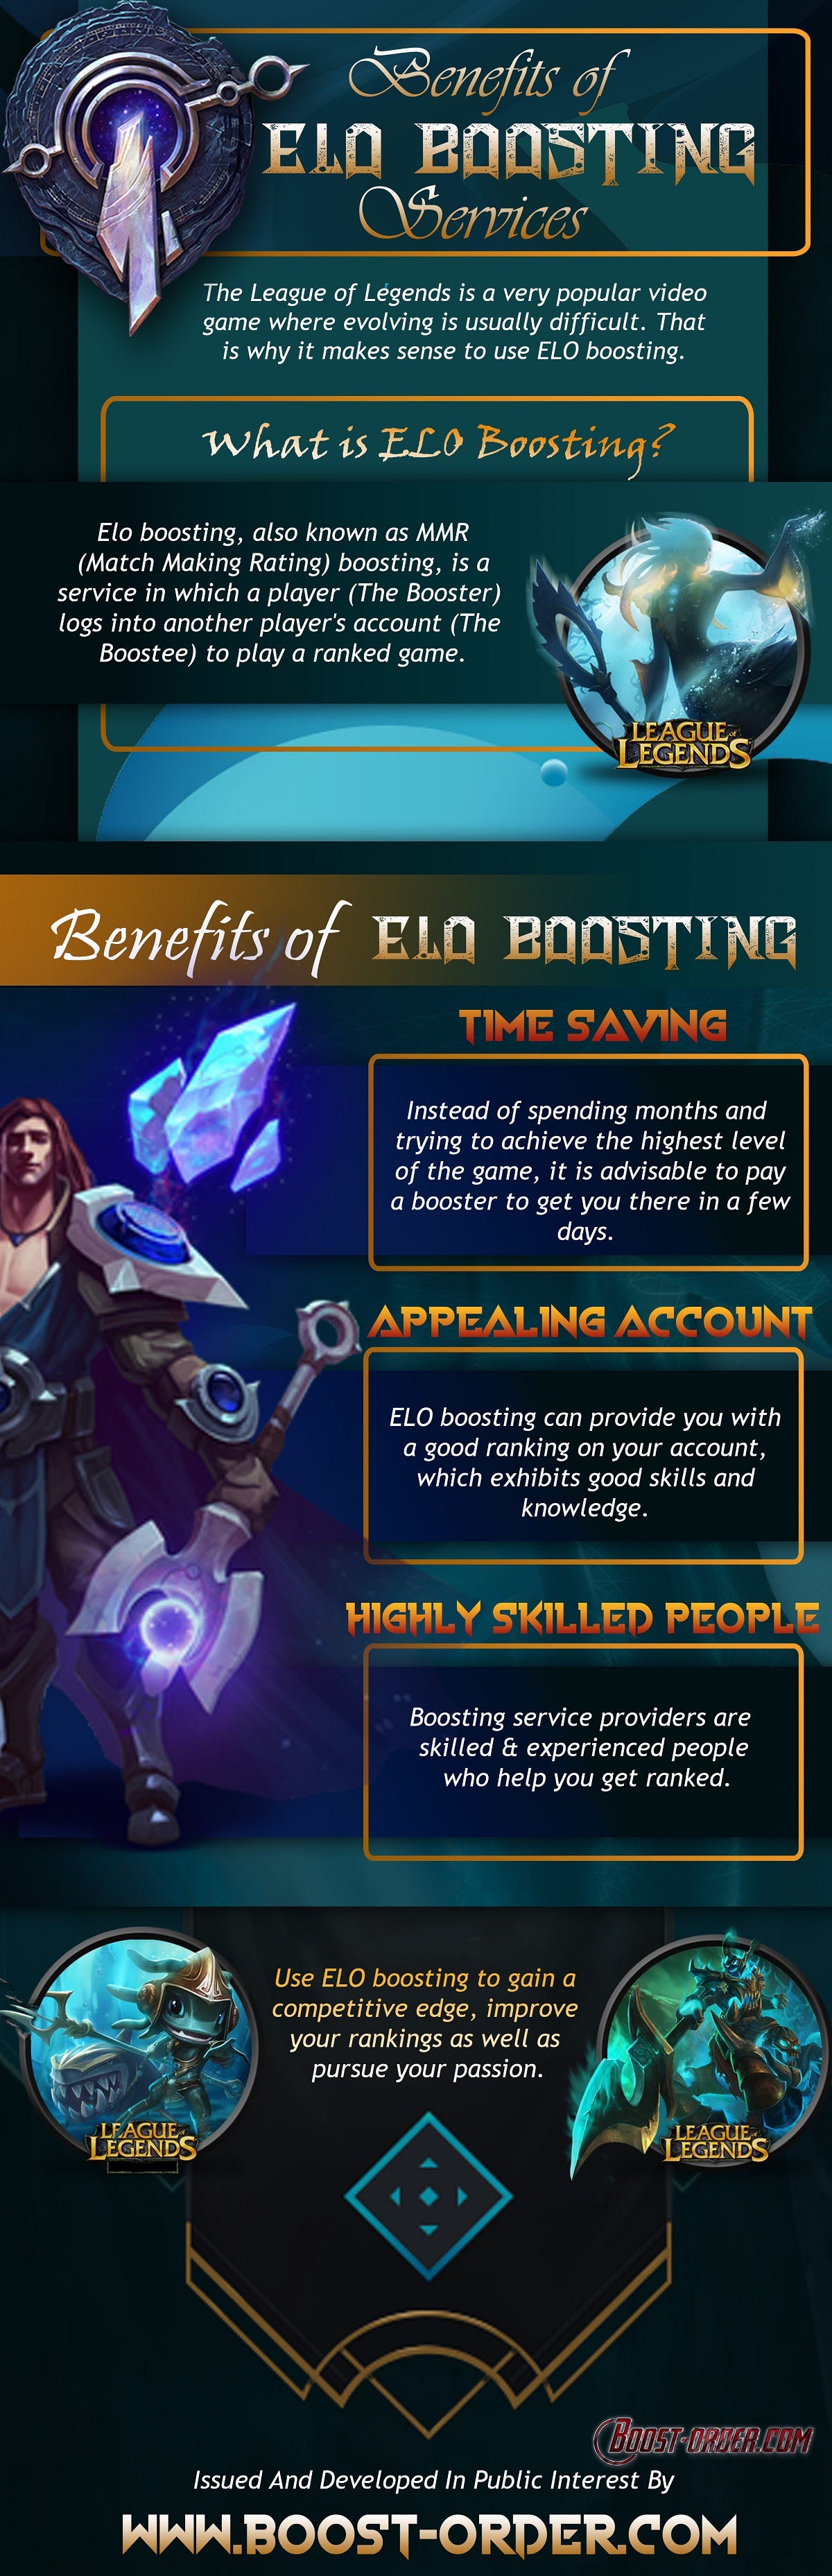 What is ELO boosting?